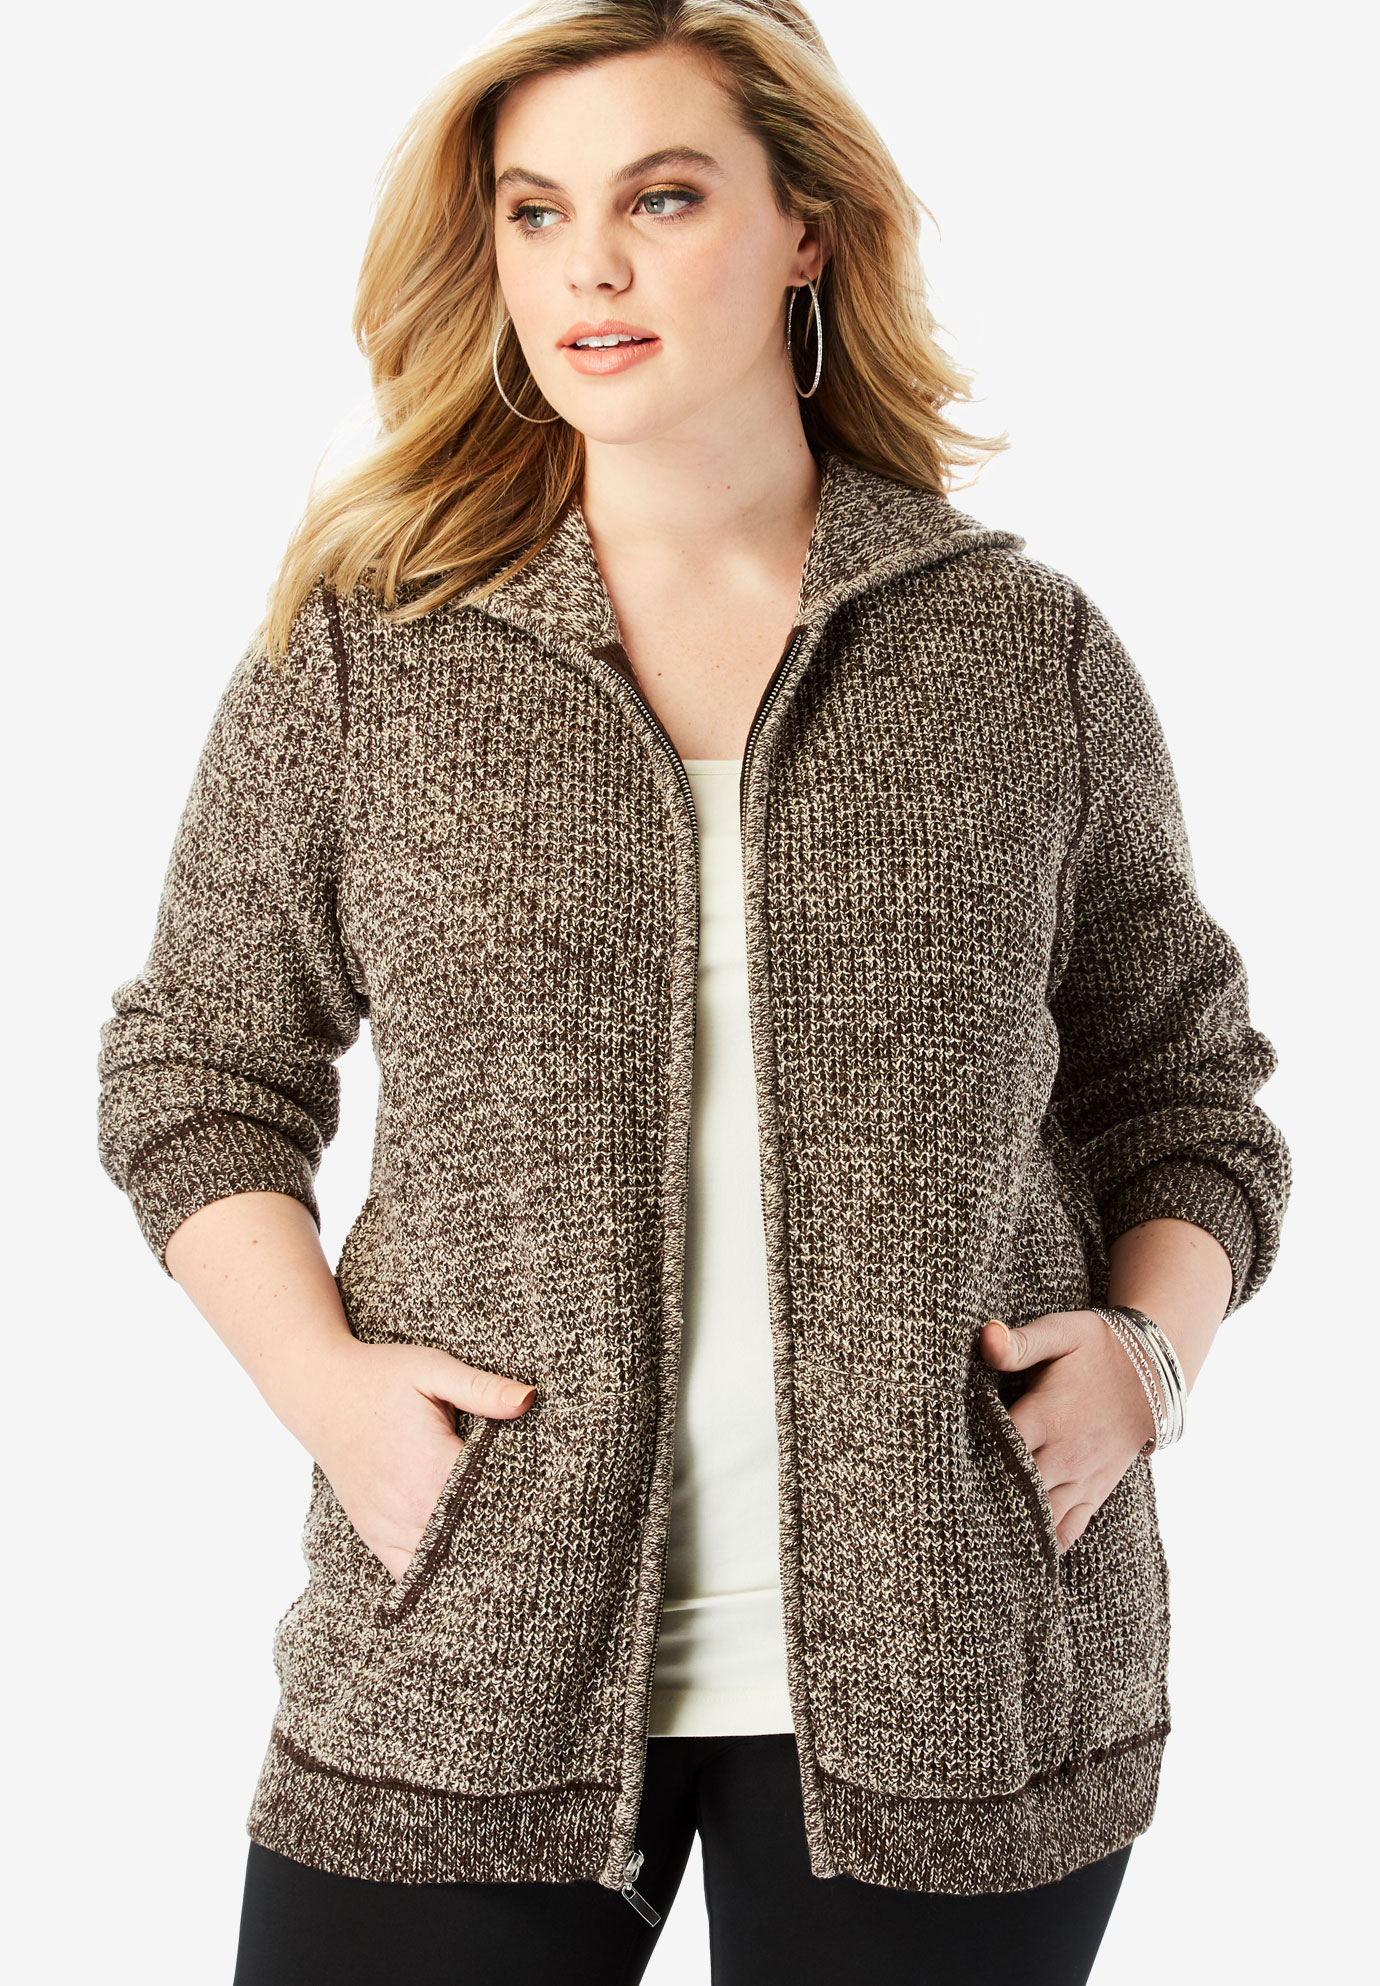 thermal hoodie cardigan for women sizes size